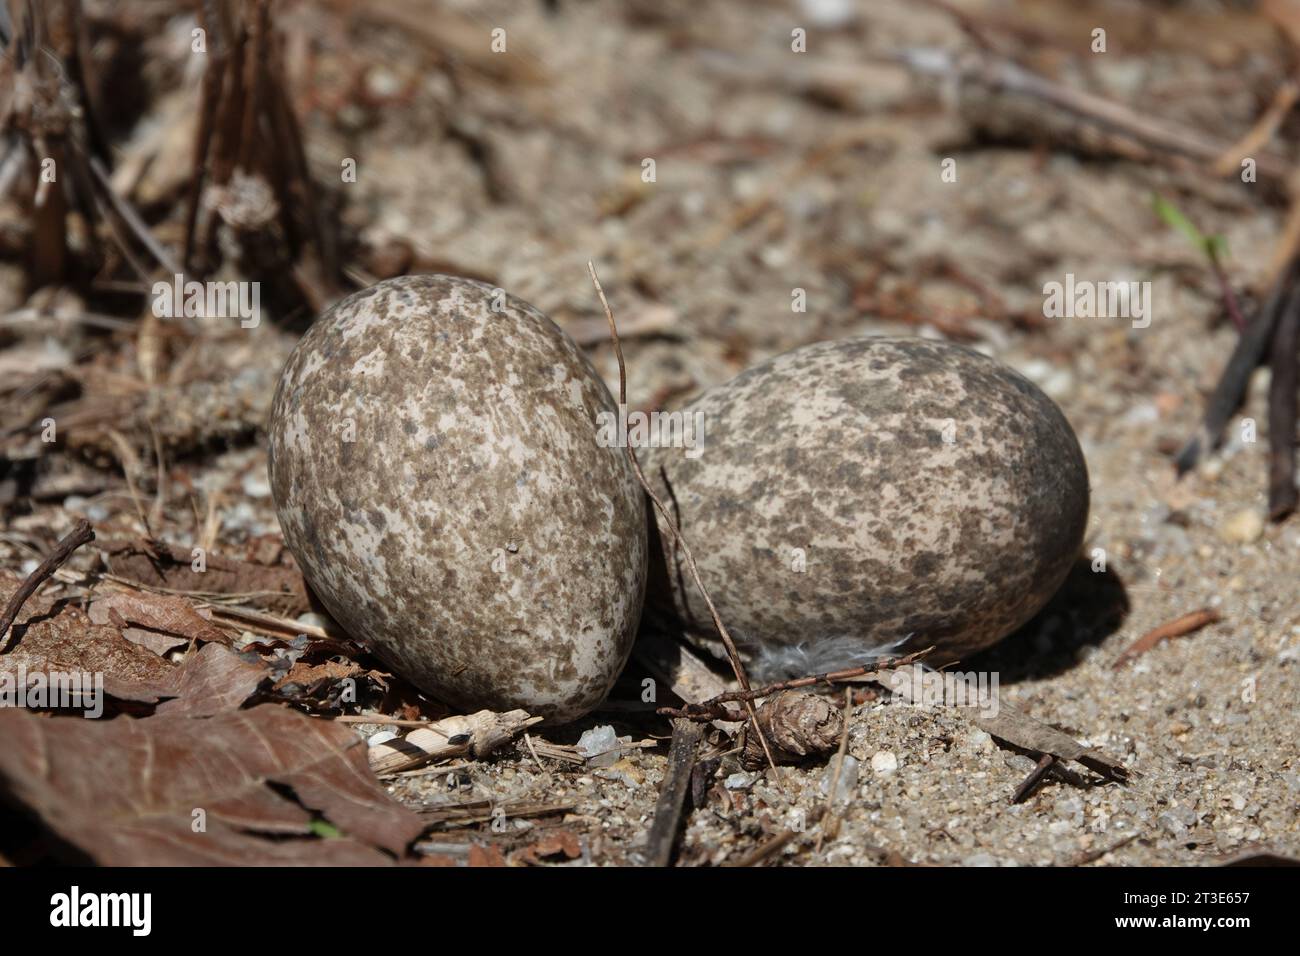 Bush-stone Curlew Eggs in ground nest in restored vegetation area, photographed at Wonga, Far North Queensland, Australia Stock Photo